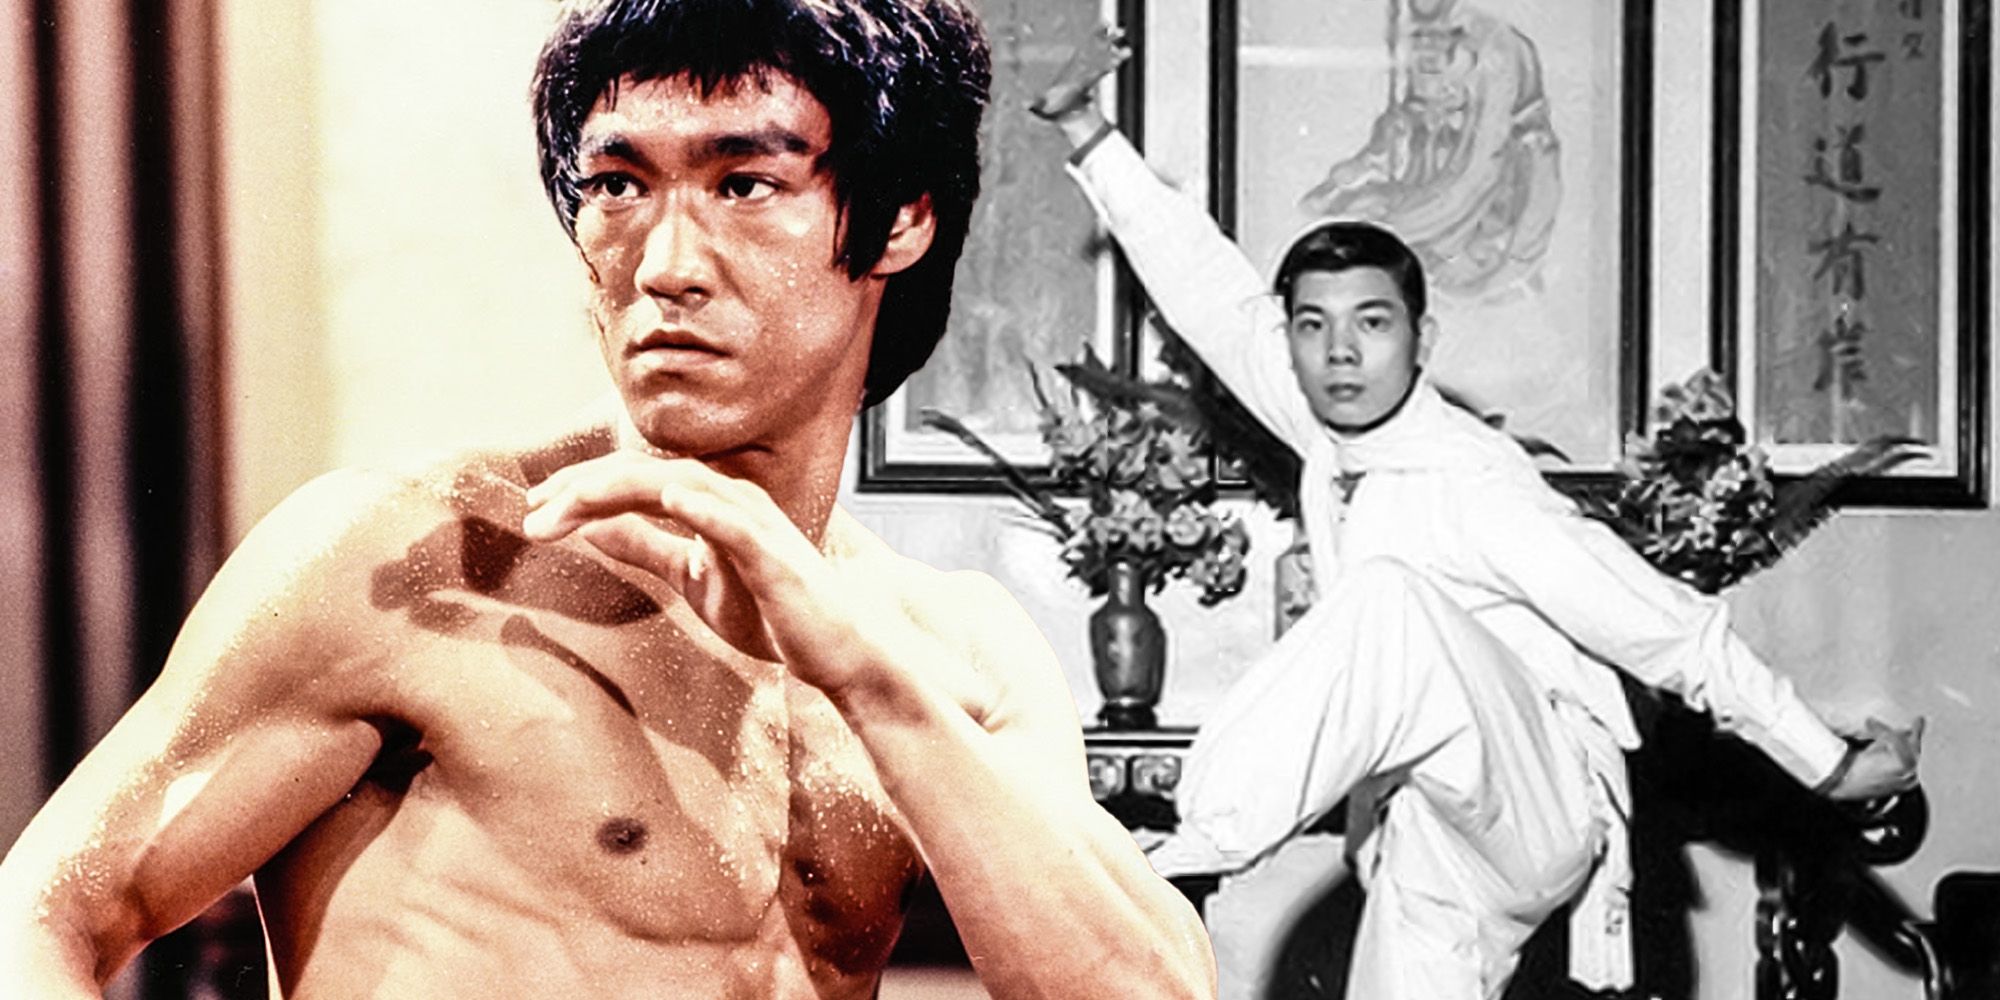 What is jeet kune do, the unique way of fighting that Bruce Lee